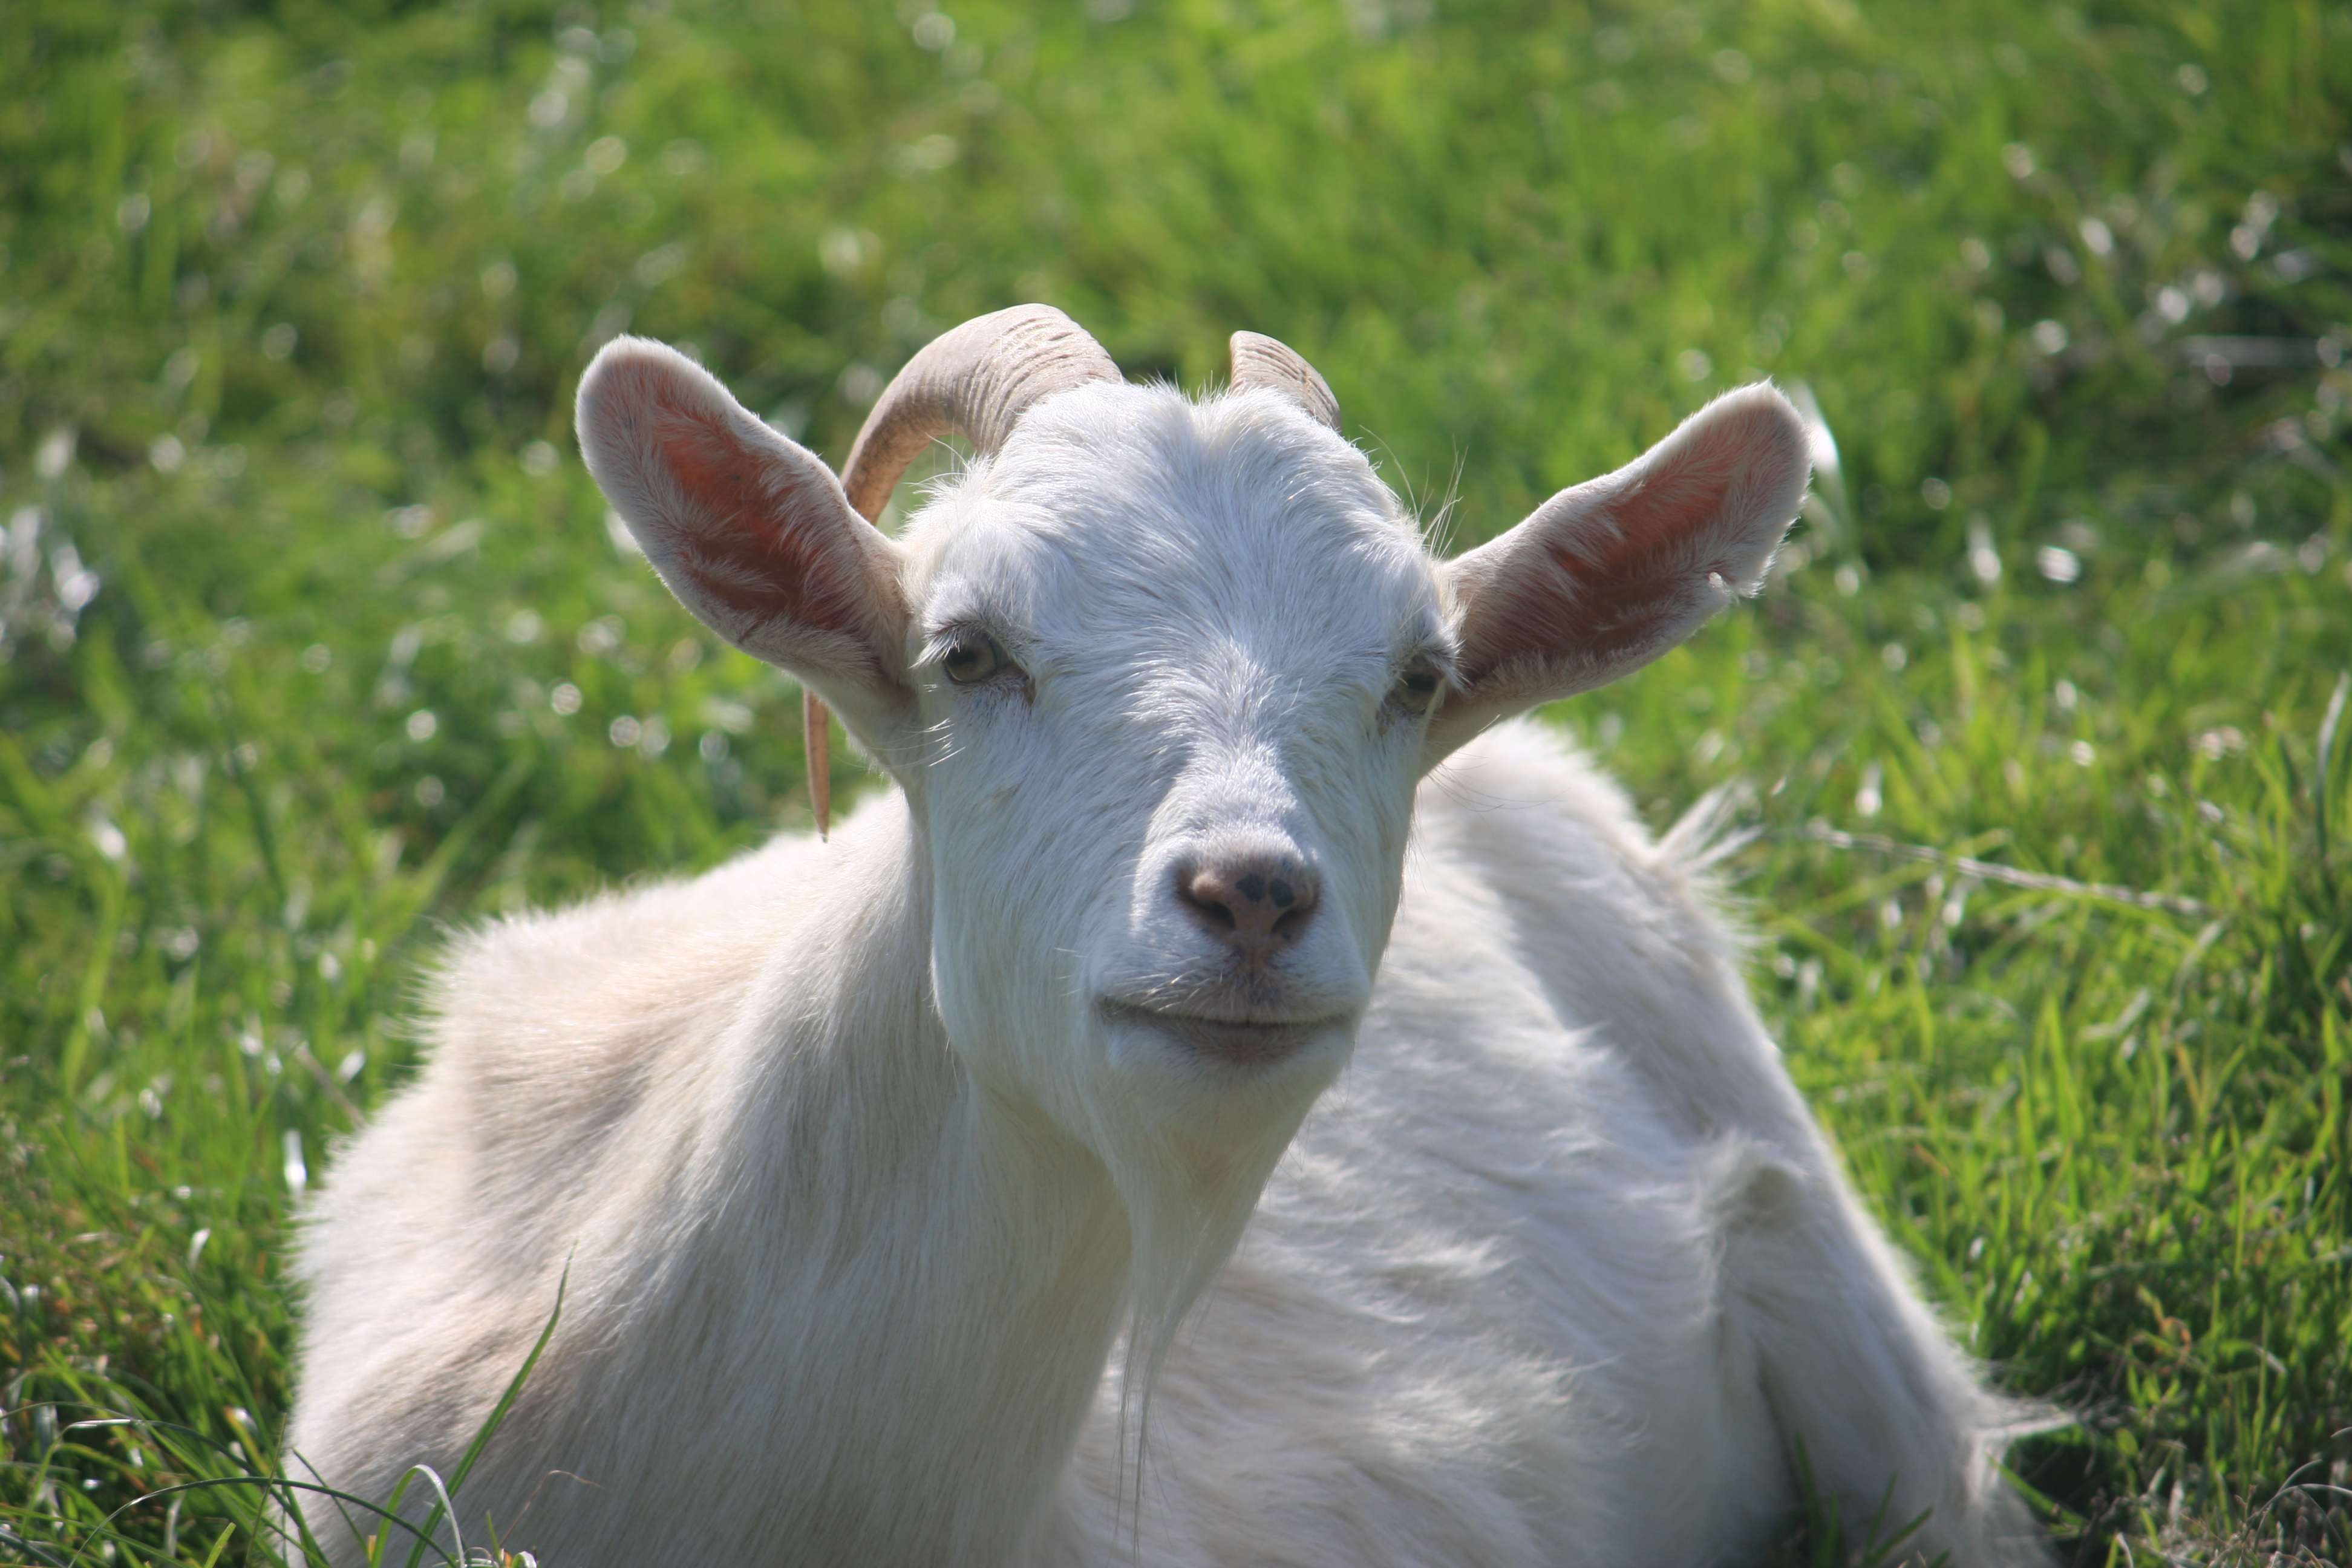 Trouble the Goat